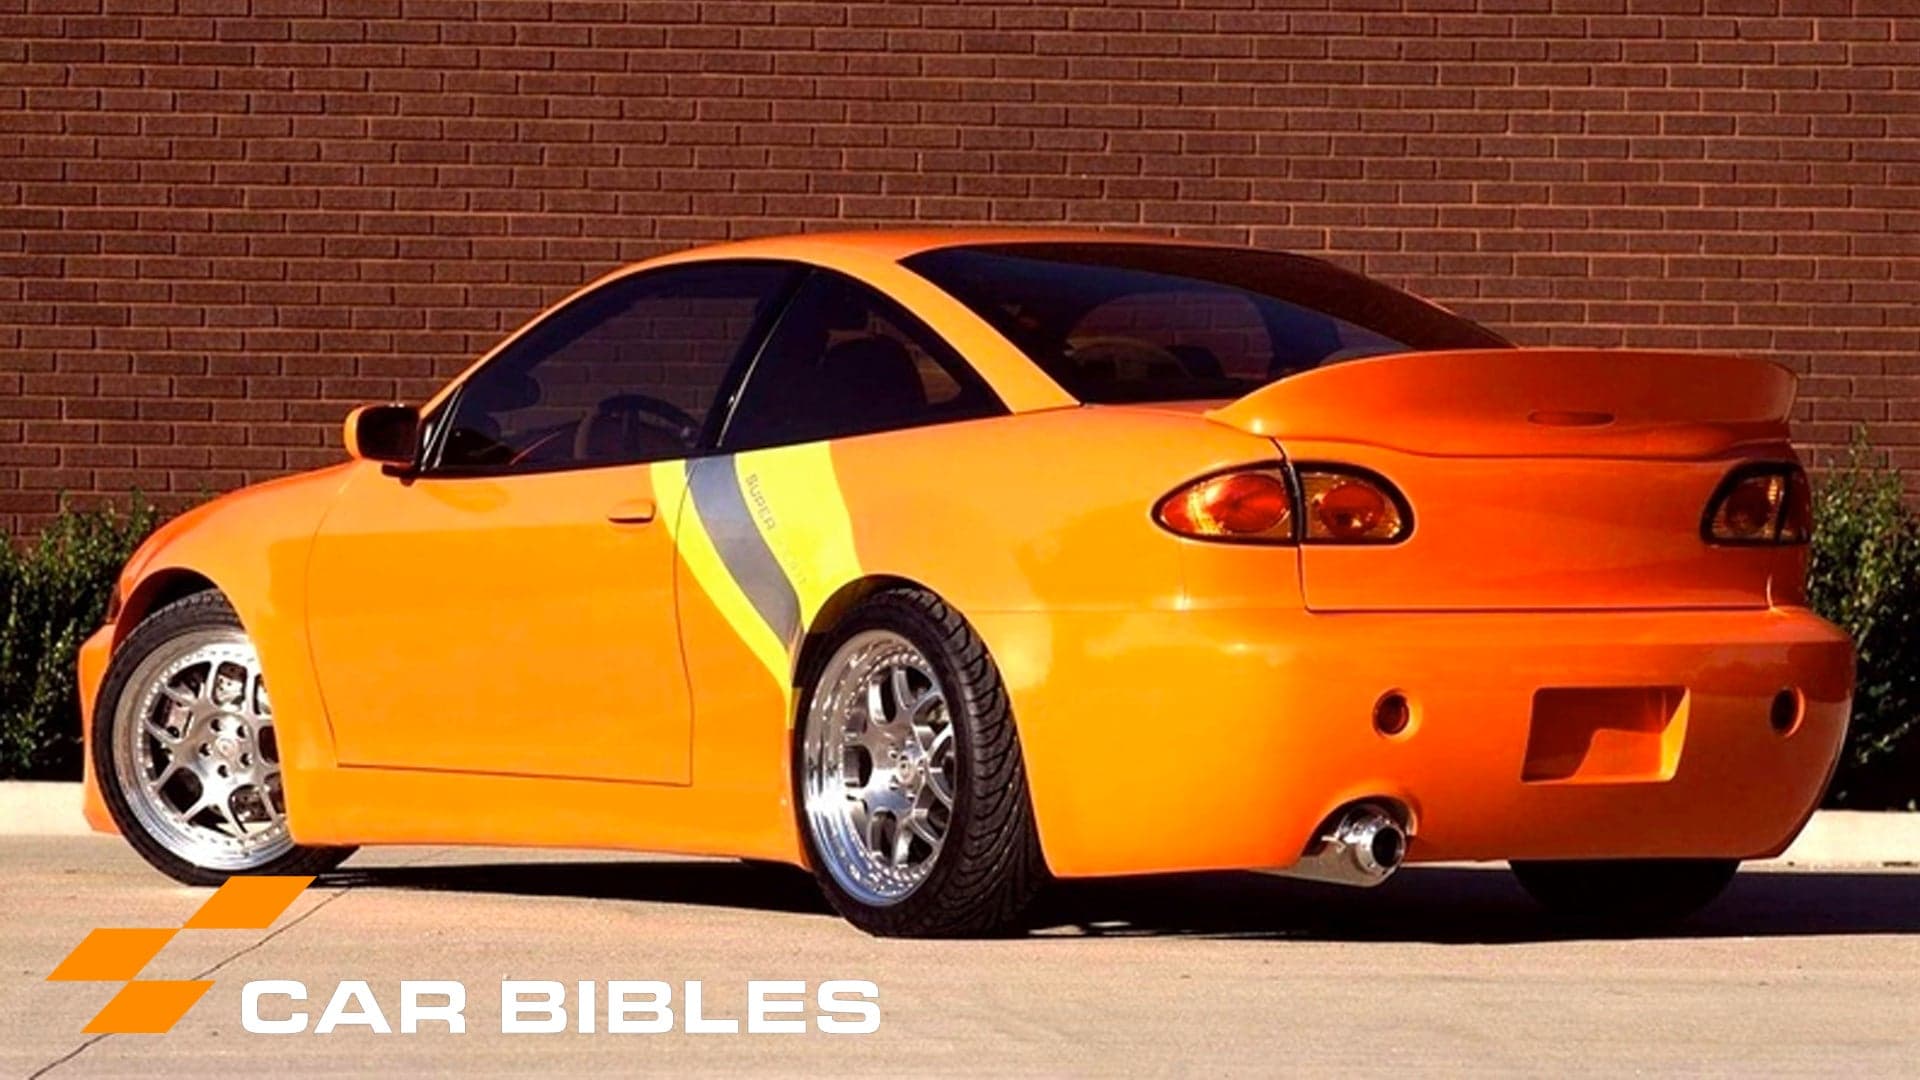 GM Took On the Import Scene With Body Kits and Underglow in 2001